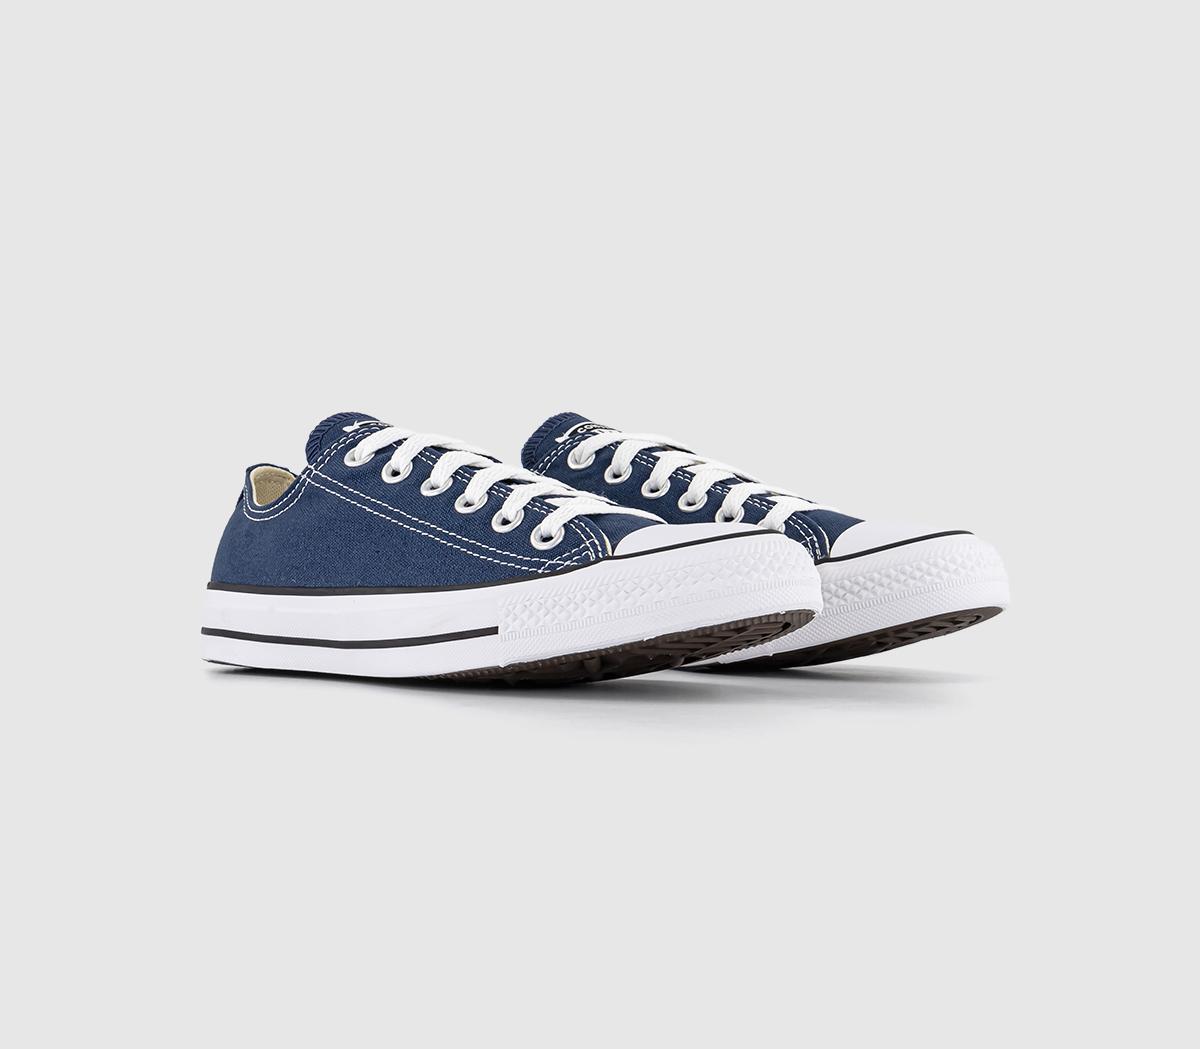 Mens Converse Kids All Star Low Canvas Trainers In Navy Blue And White, 3